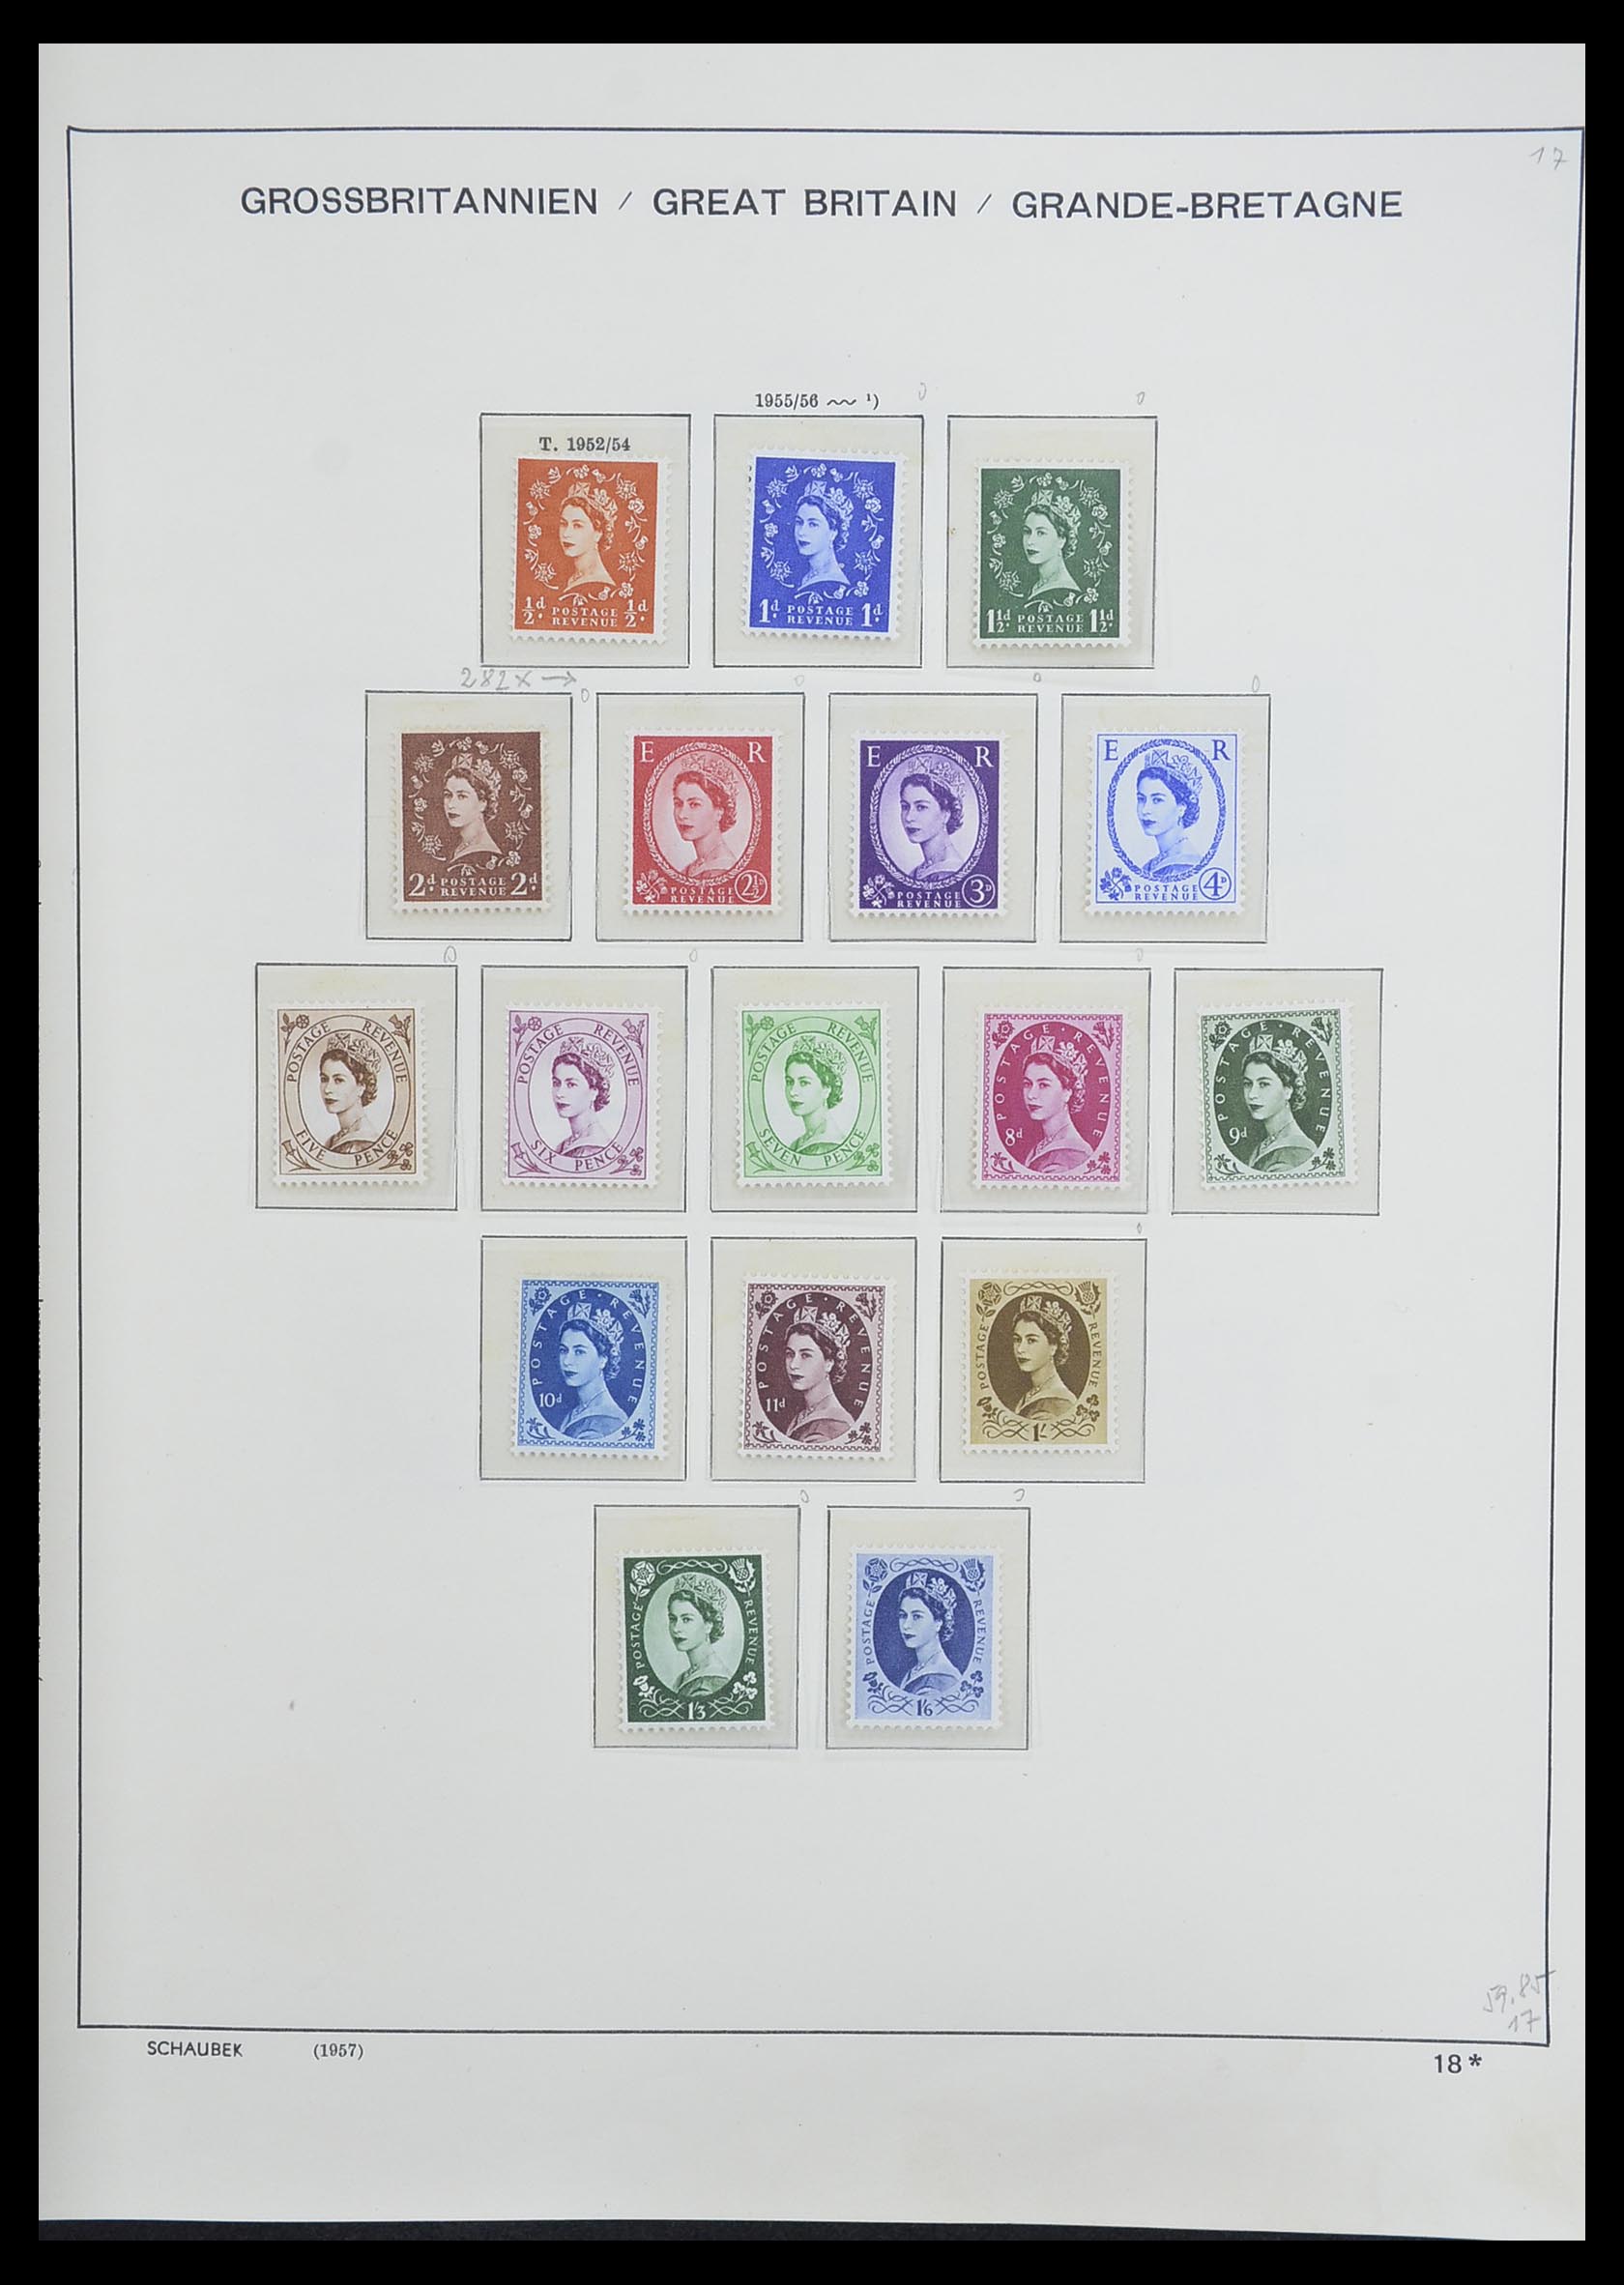 33250 020 - Stamp collection 33250 Great Britain 1841-1995.